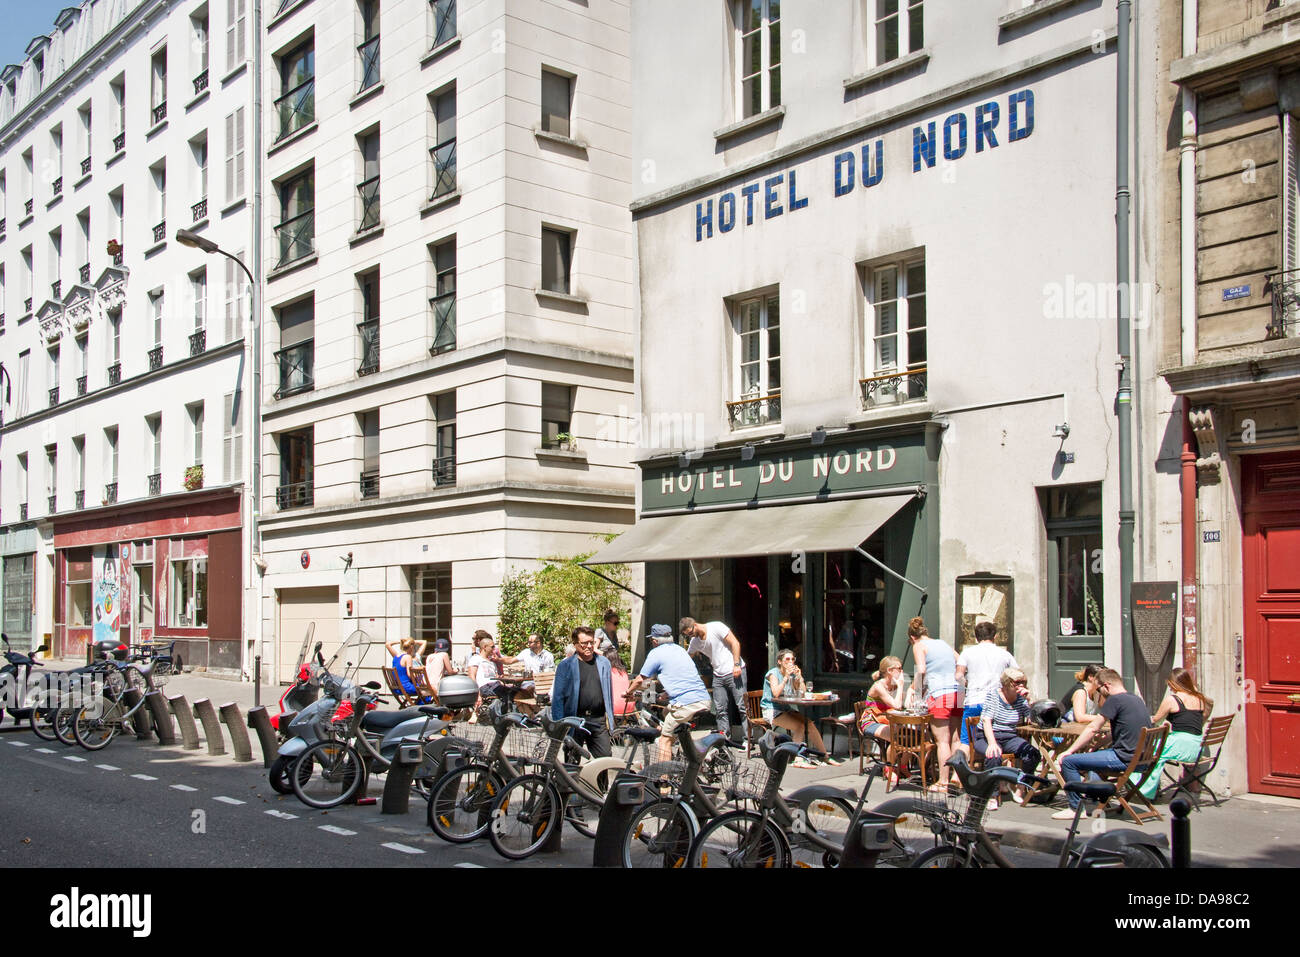 The famous Hotel du Nord, near canal Saint-Martin in Paris - France Stock Photo